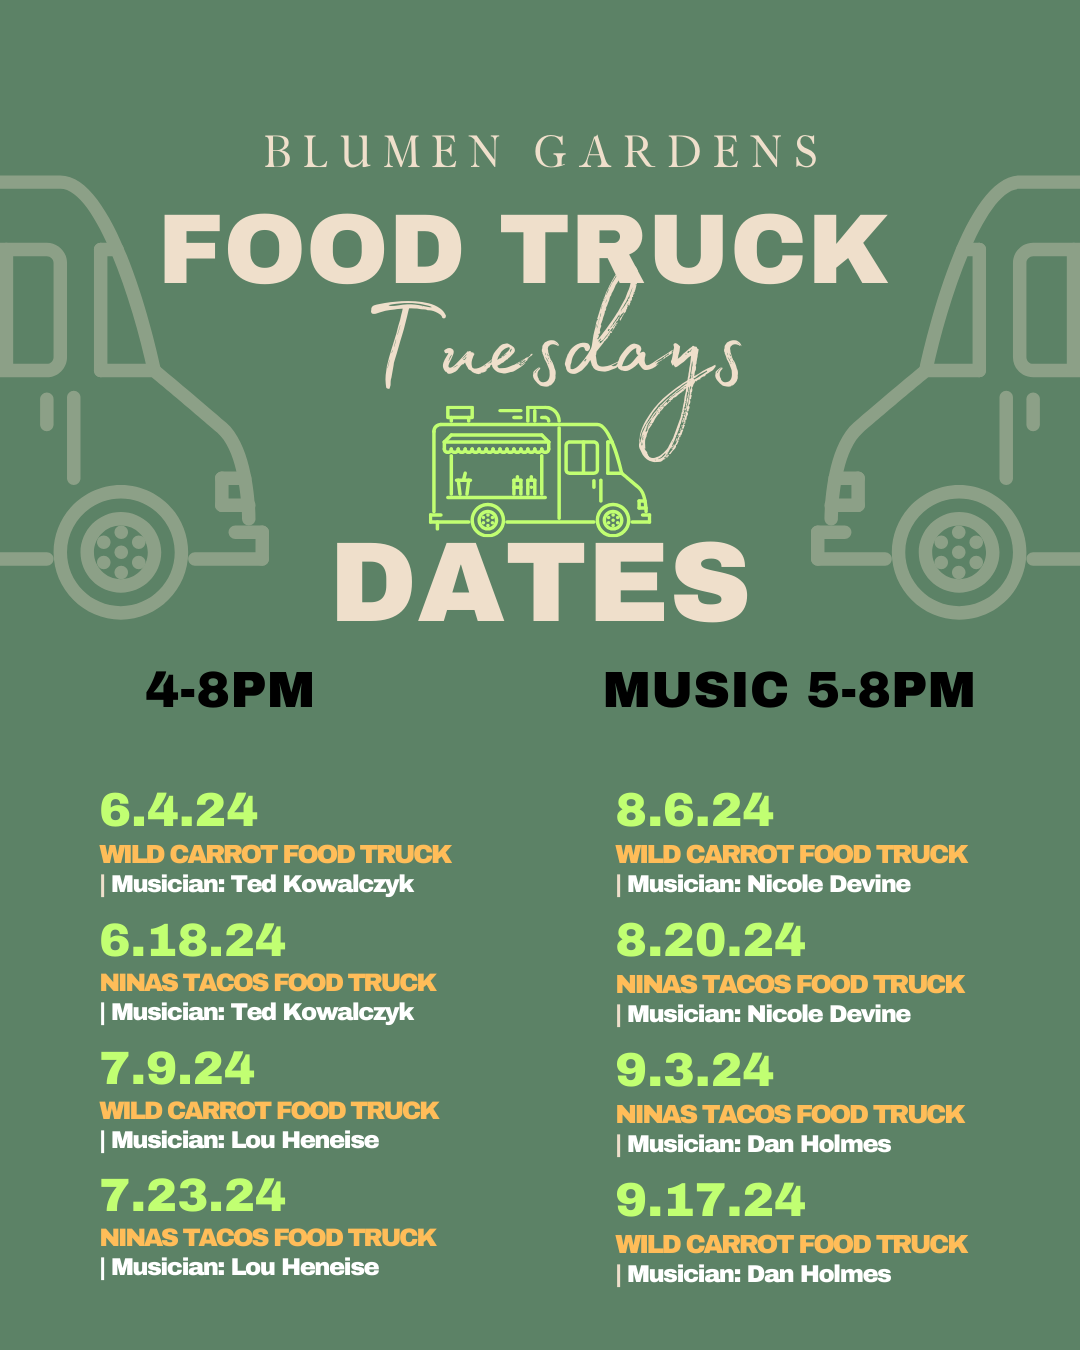 Food Truck Tuesday at Blumen Gardens- Tuesday, June 18th- 4-8PM